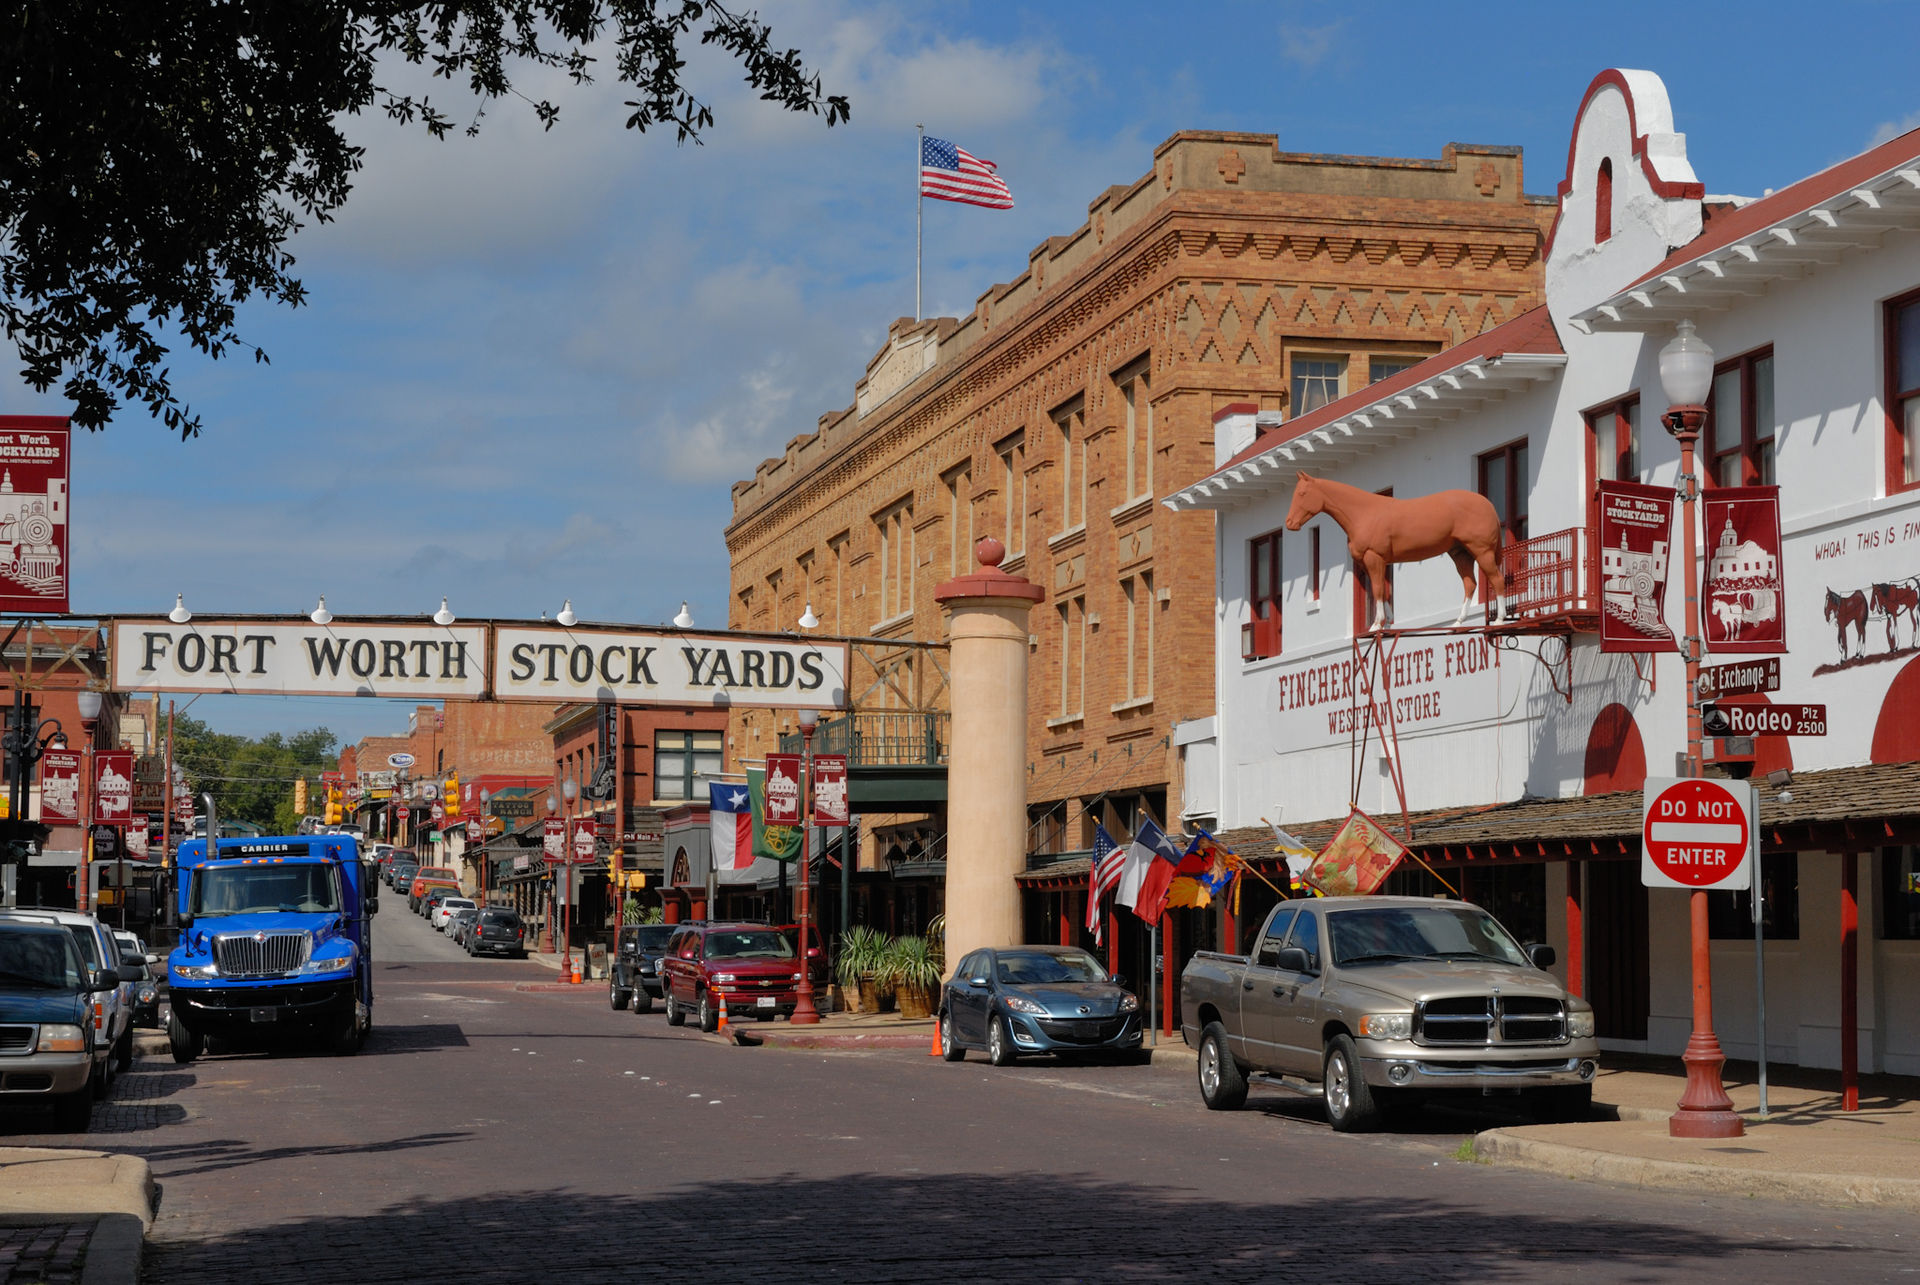 Fort Worth Stockyards Historic DistrictExchange Avenue, The Stockyards Hotel, and Fincher's White Front Western Store in the Fort Worth Stockyards Historic District